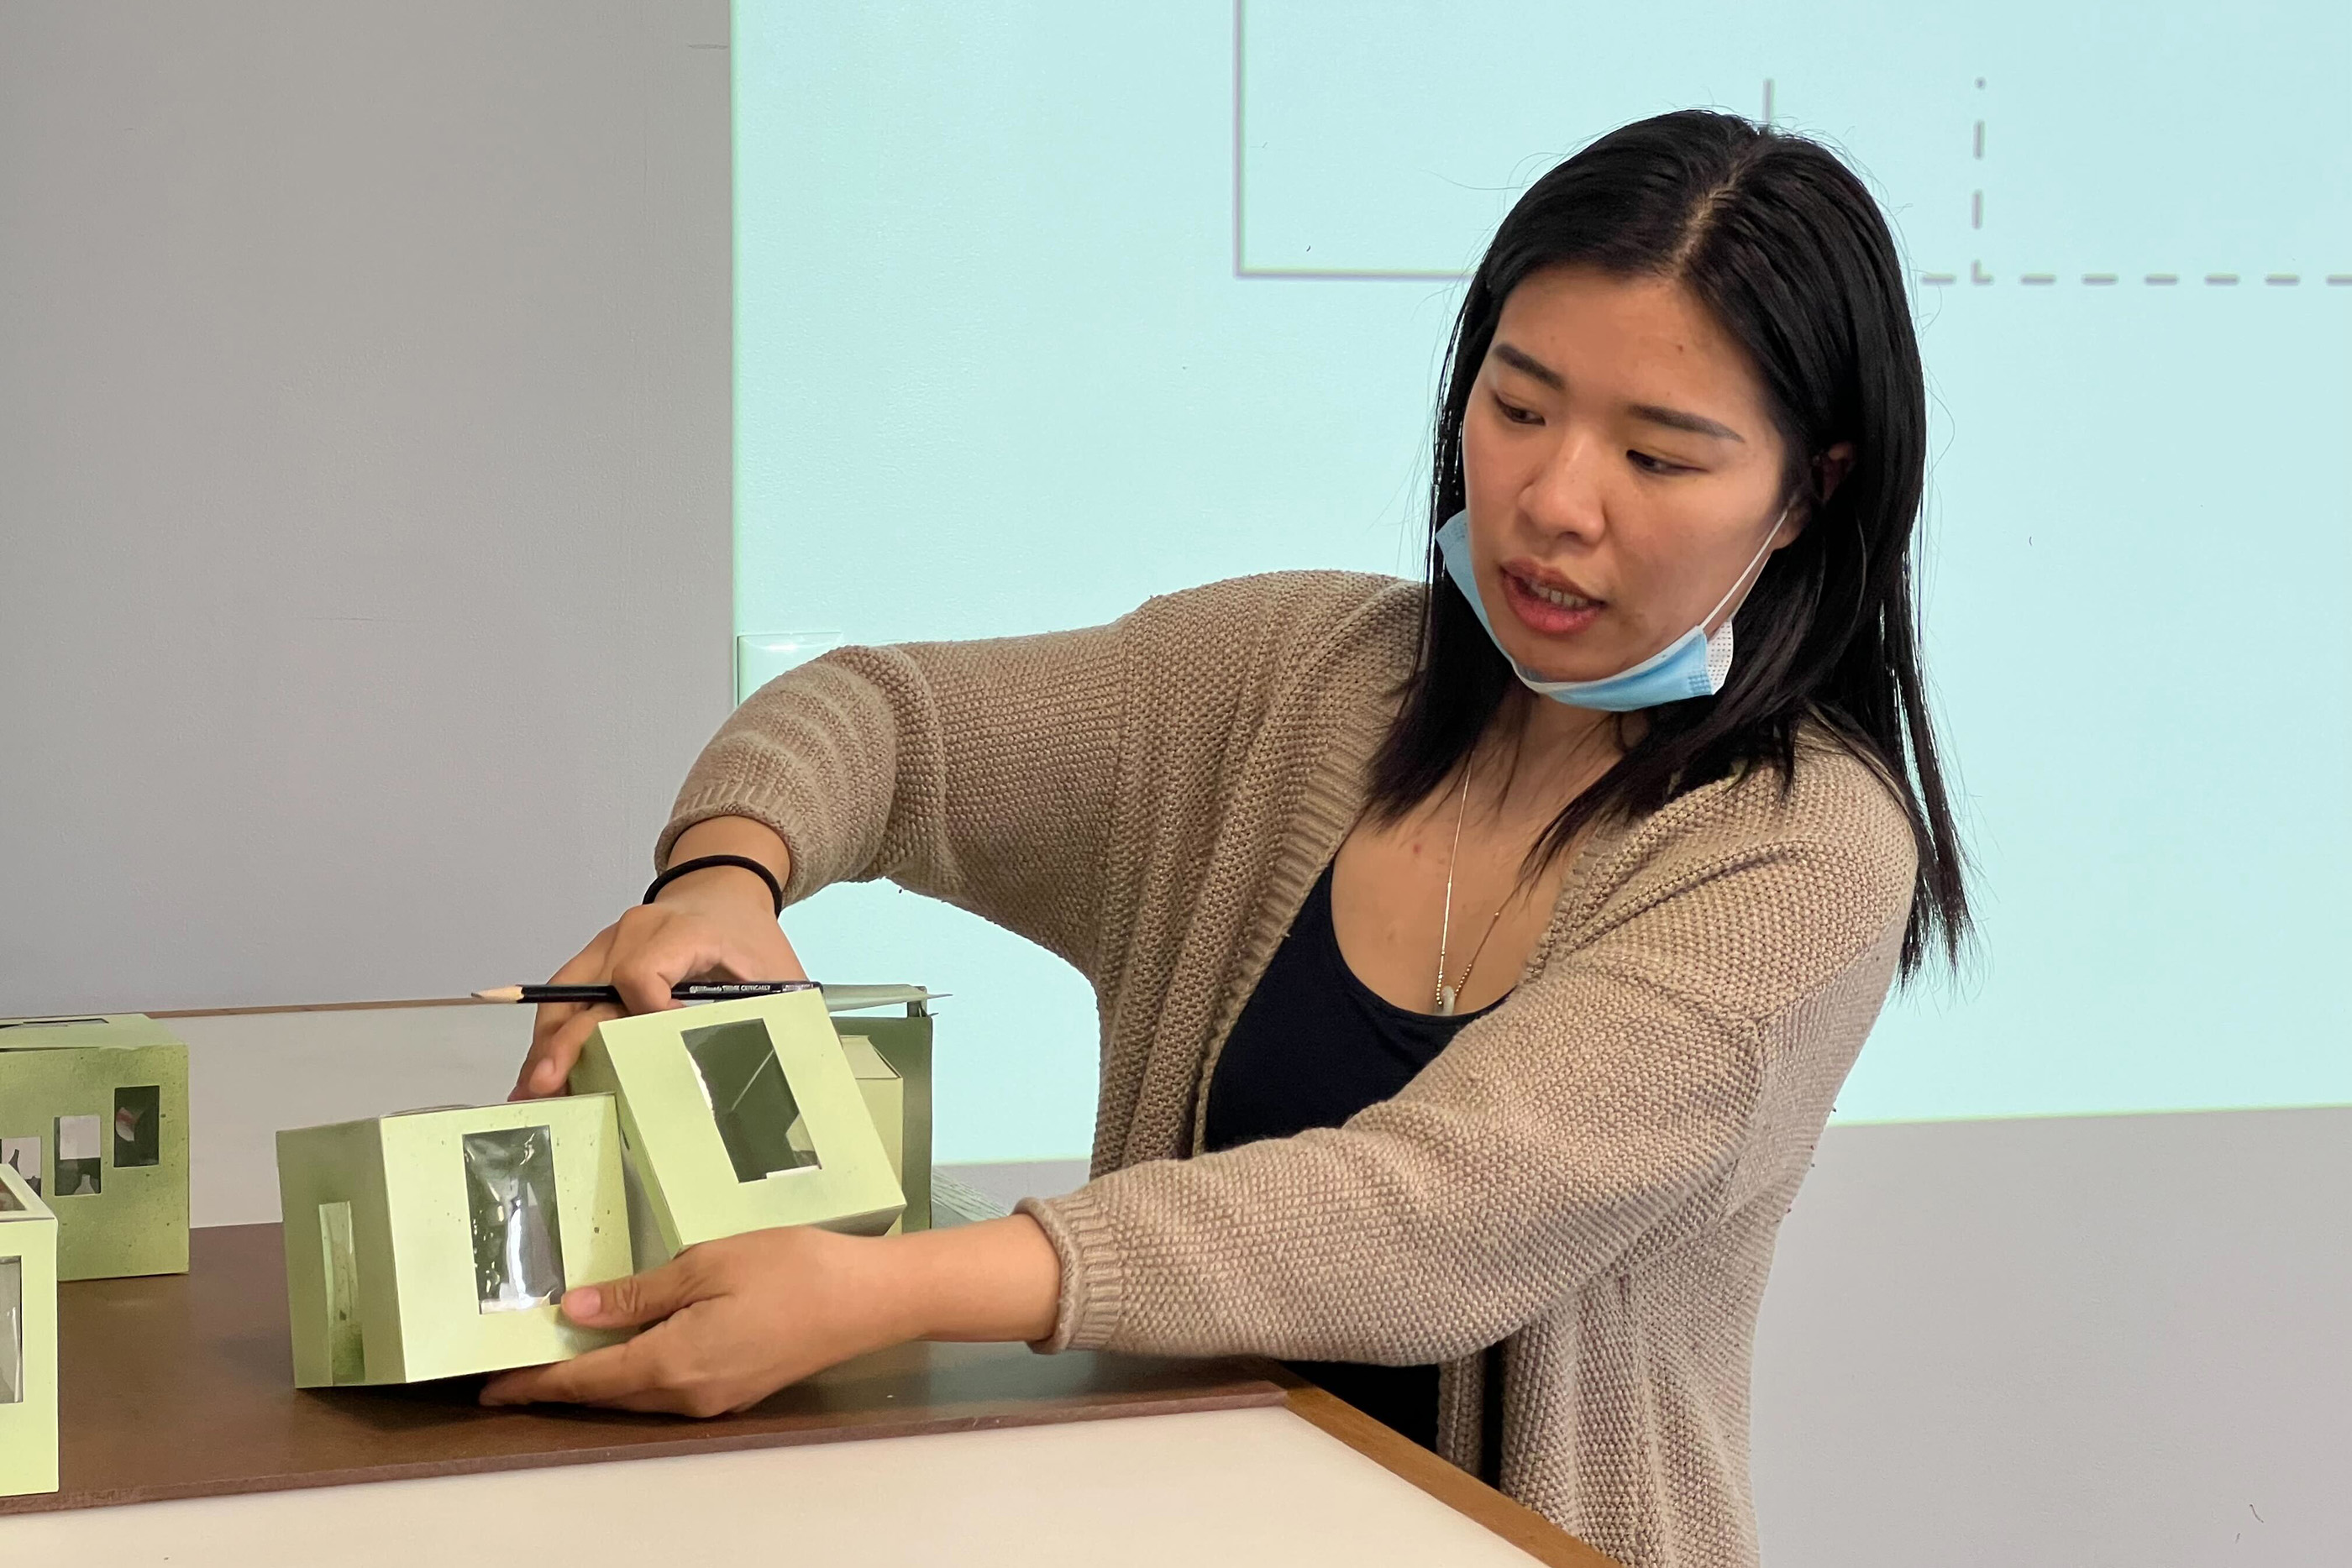 Meng Su shows design to reviewers